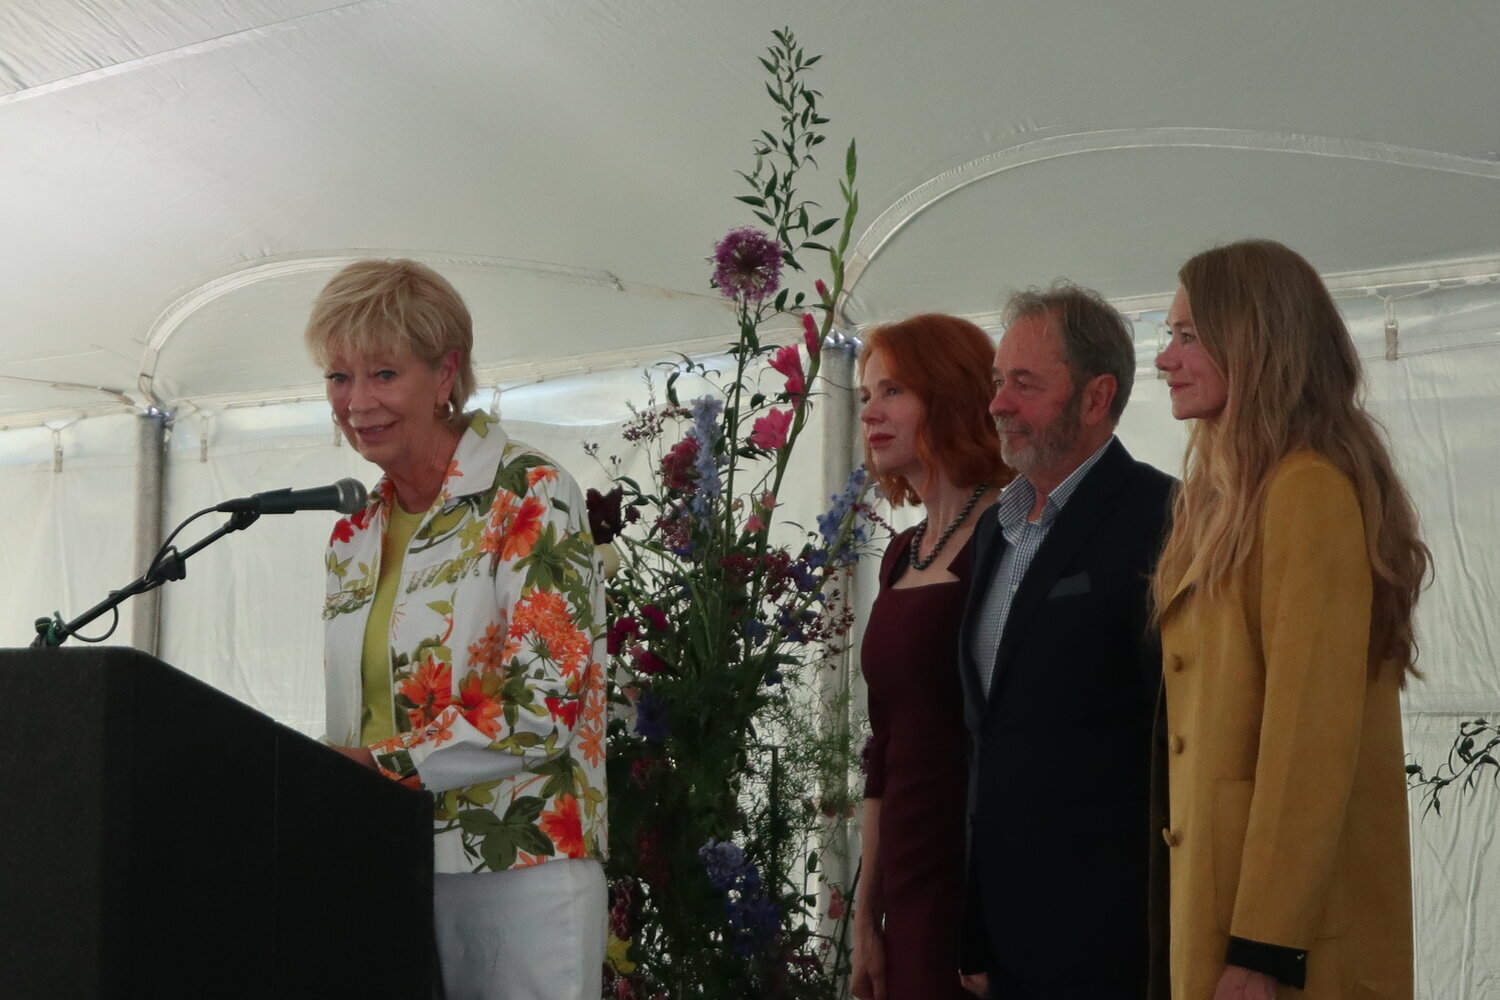 Judy Chant, wife of Davis R. Chant, thanked the hundreds of people who came to his public memorial service on May 21. She is flanked by her family, Holley Chant, Bruce Porter and Tamara Chant, who she said were responsible for warm community gathering.